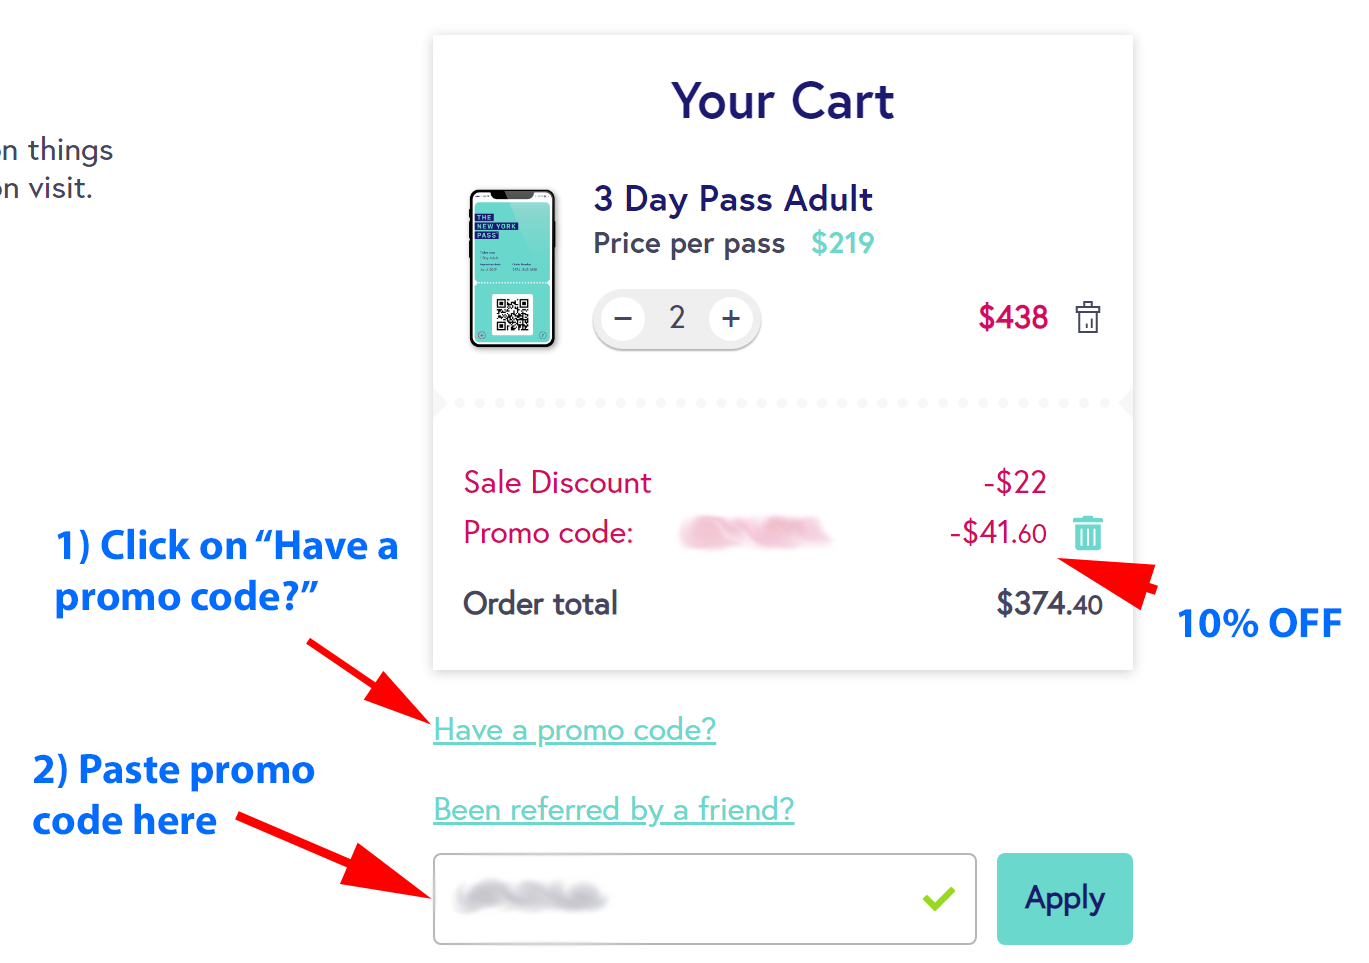 Screenshot of the New York City Pass Chart with discount applied that is better than Costco